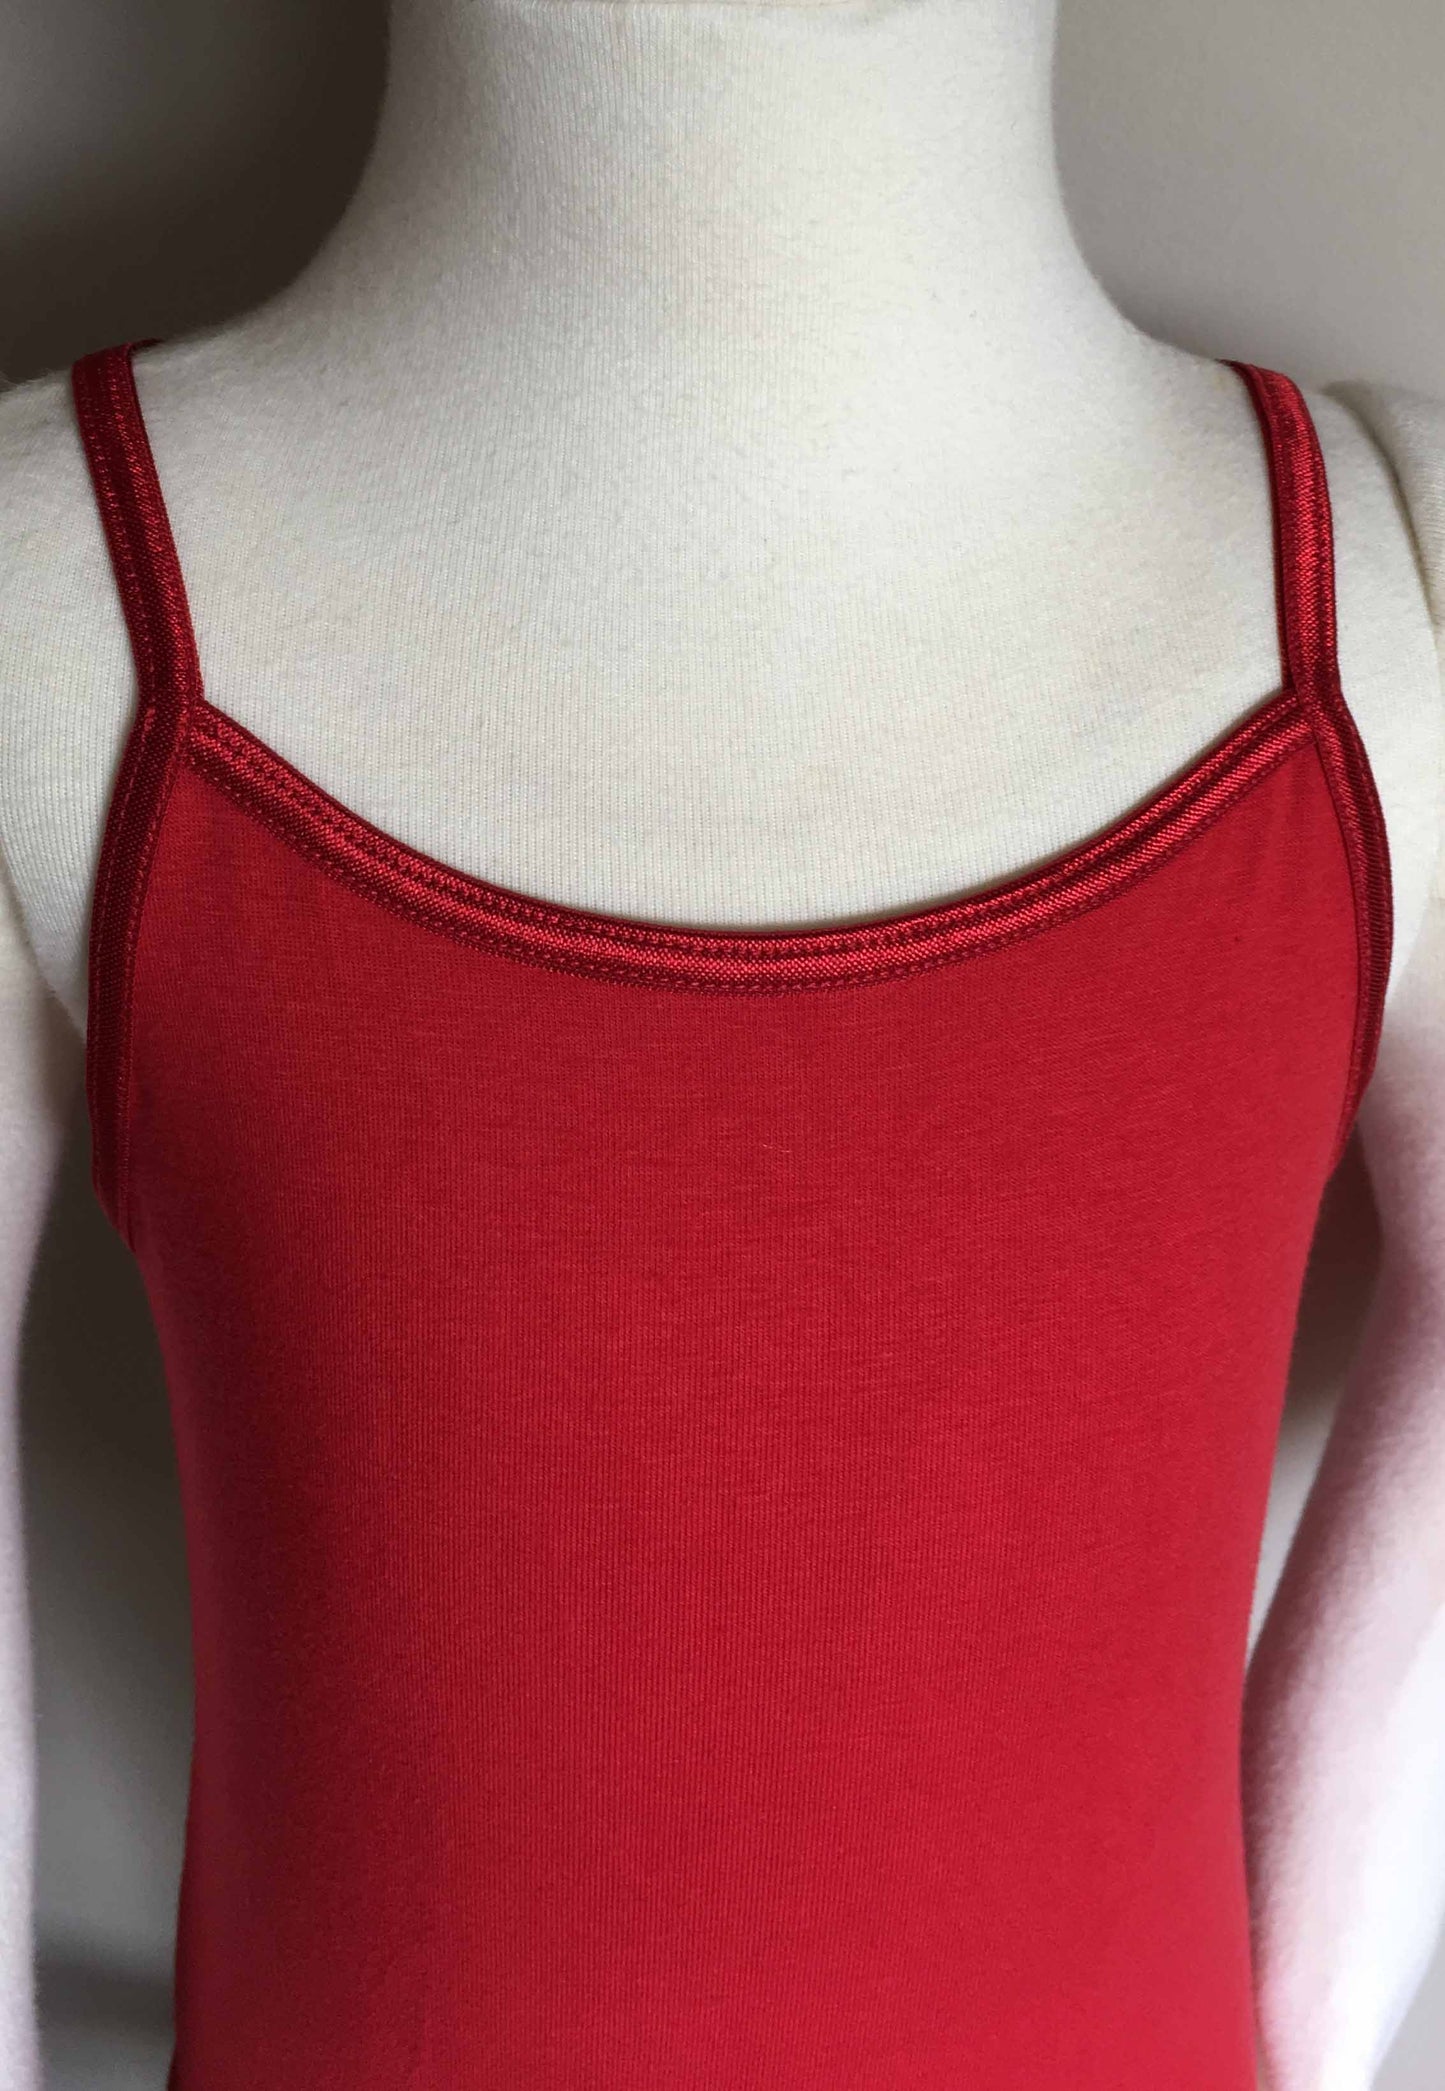 The Camisole - Available for over 10+ Years